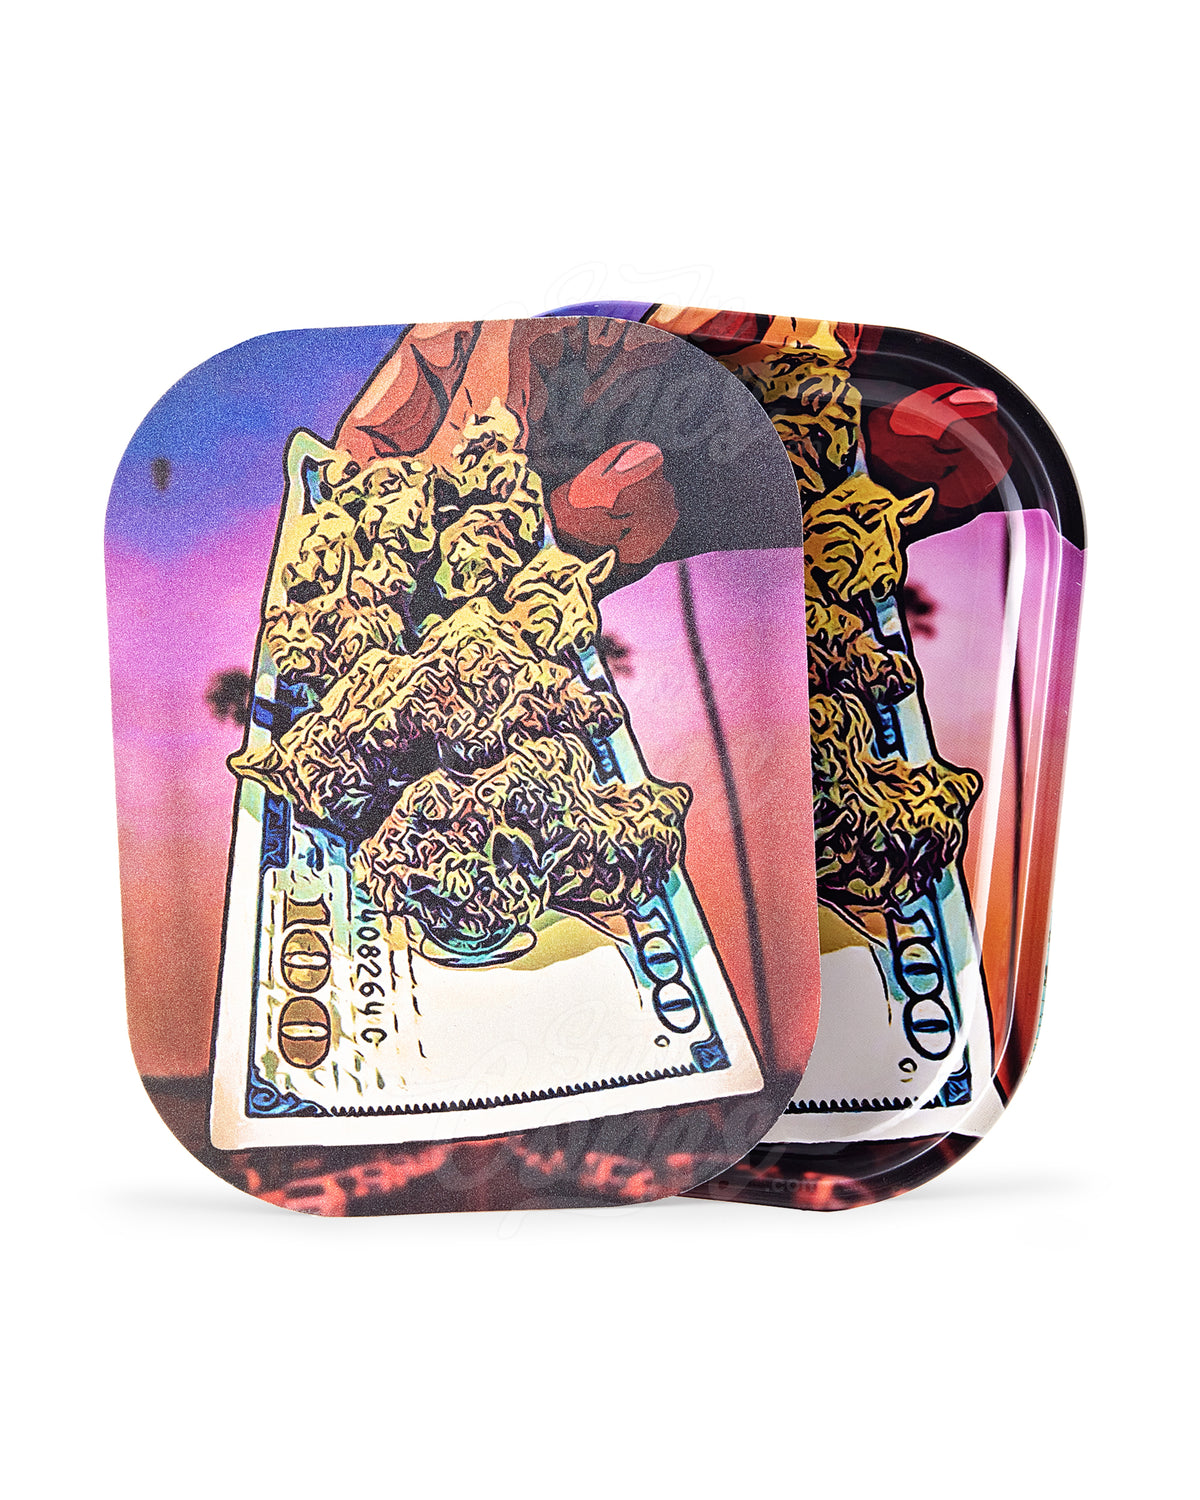 Nug Money Mini Rolling Tray w/ Magnetic Cover - 1